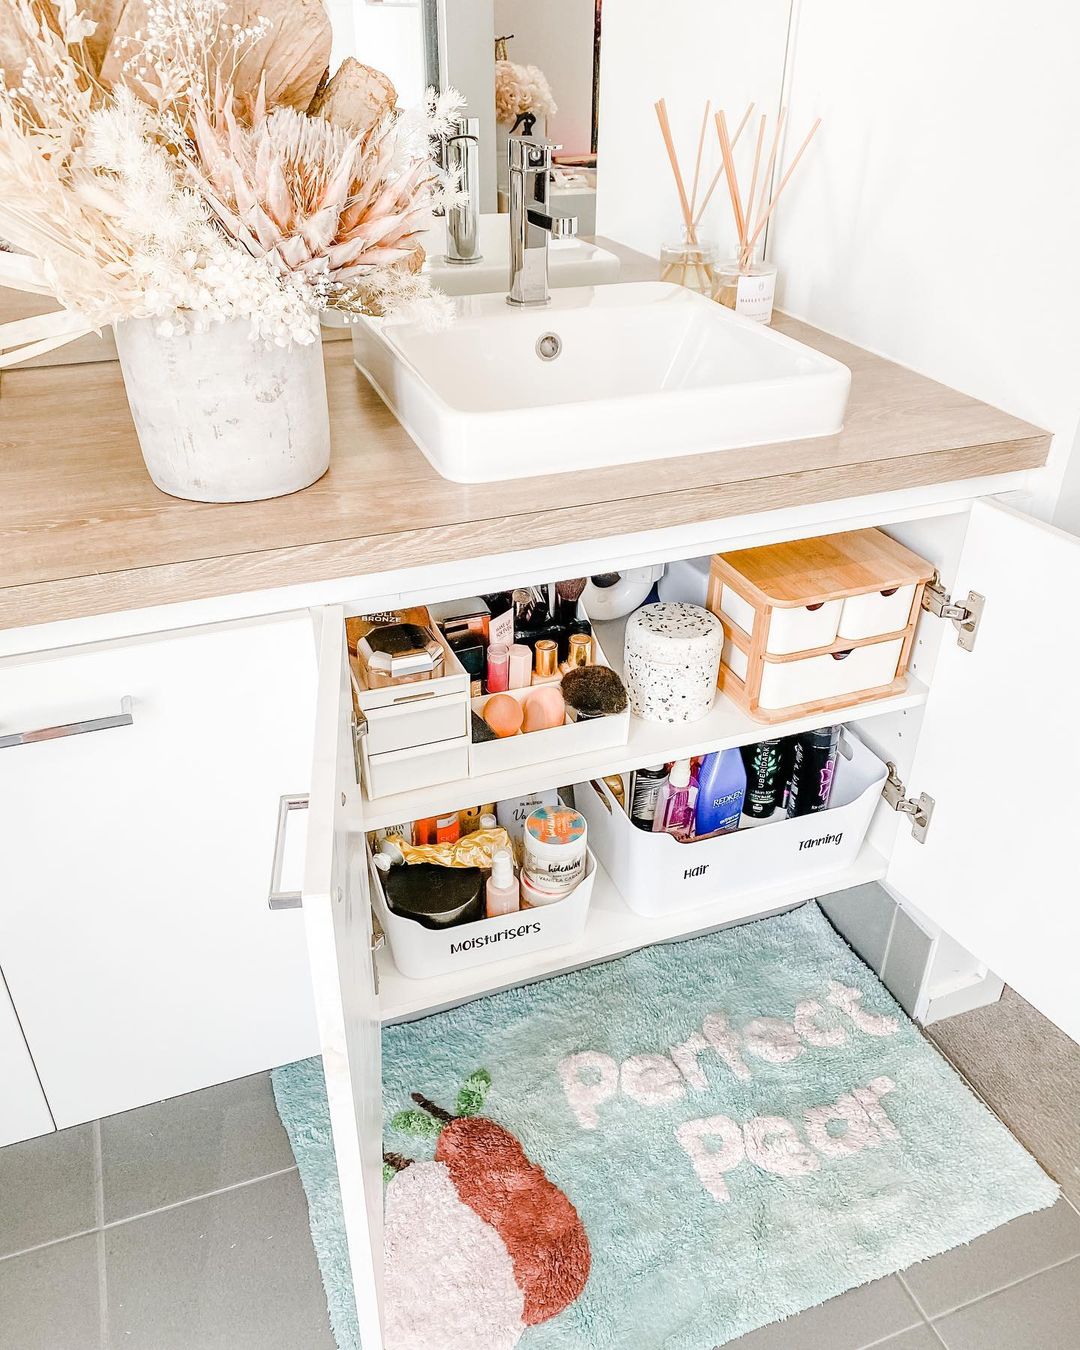 Bathroom Cabinet Care: How To Maintain Your Bathroom Cabinet?